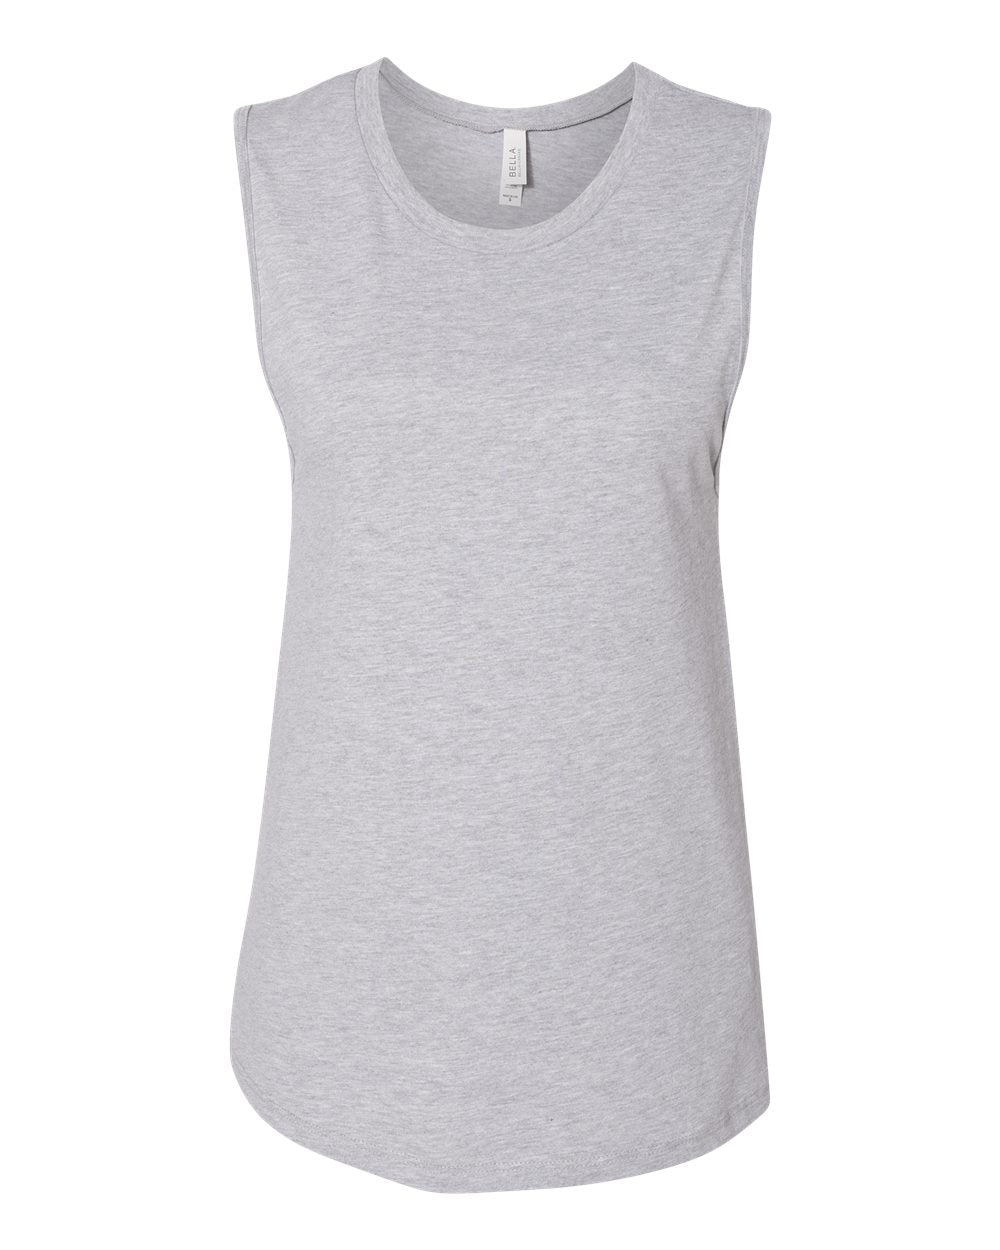 bella+canvas womens muscle tank athletic heather